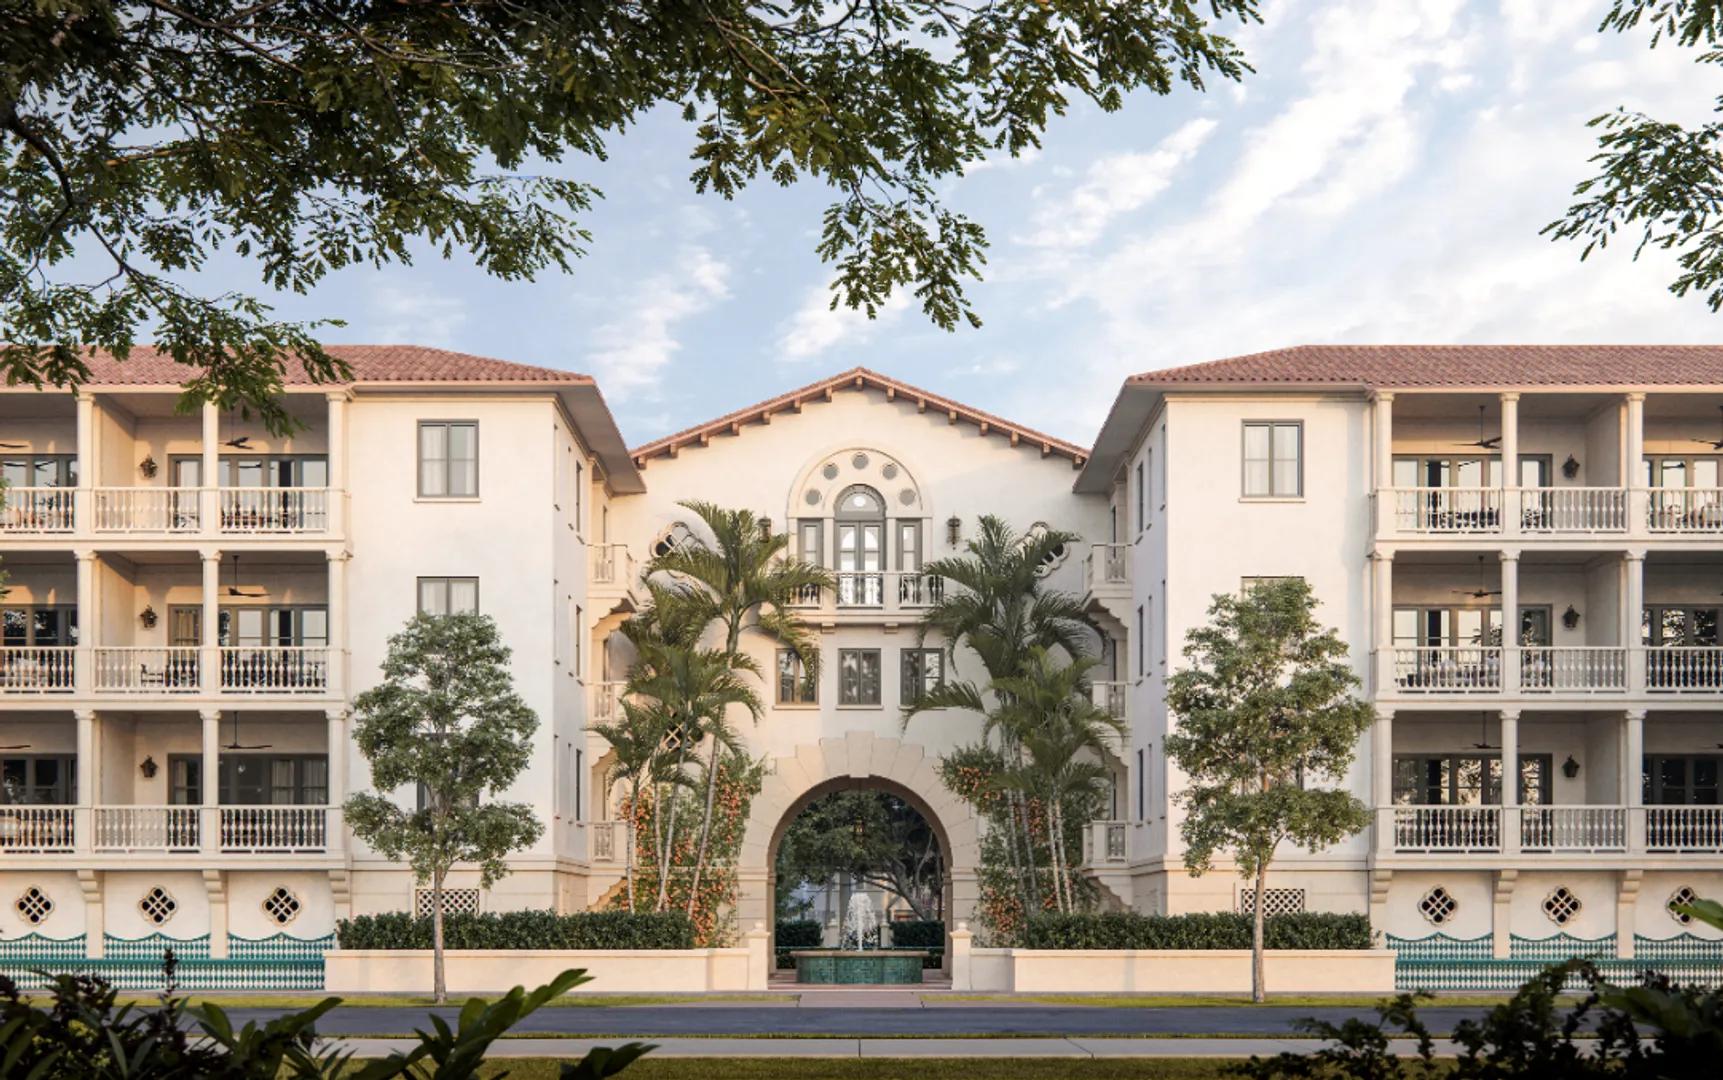 The Village at Coral Gables